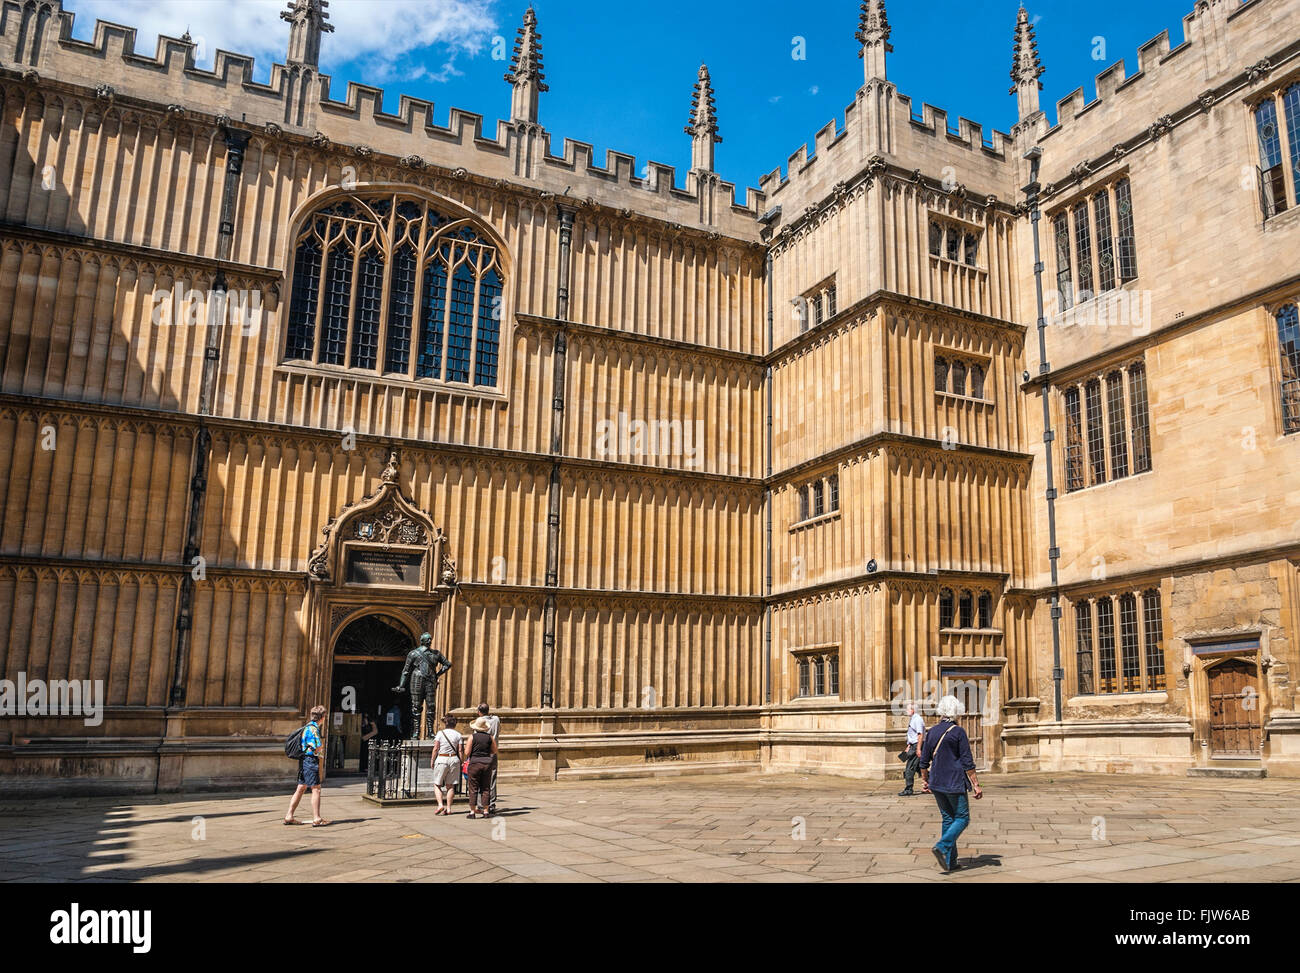 Courtyard of the Bodleian Library in Oxford, Oxfordshire, England Stock Photo